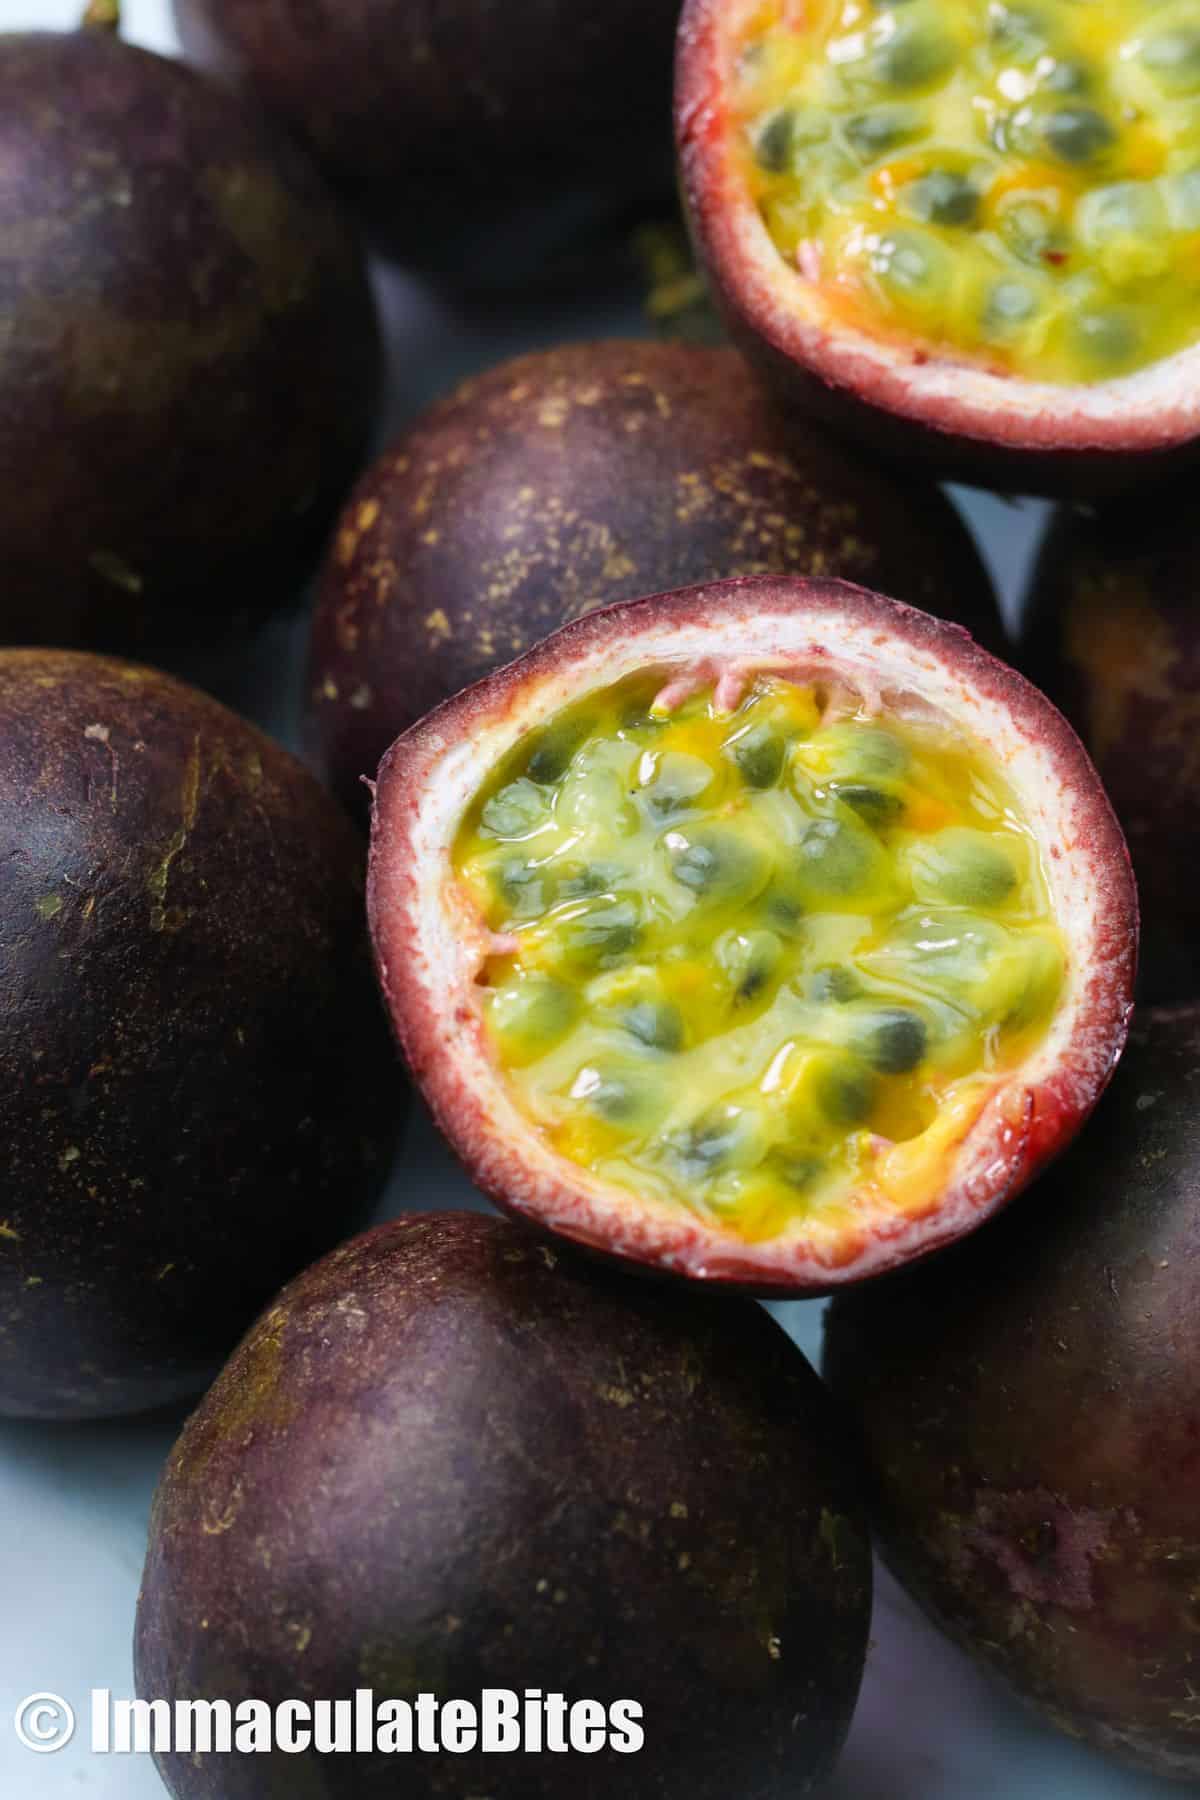 Passion fruit with some cut in half